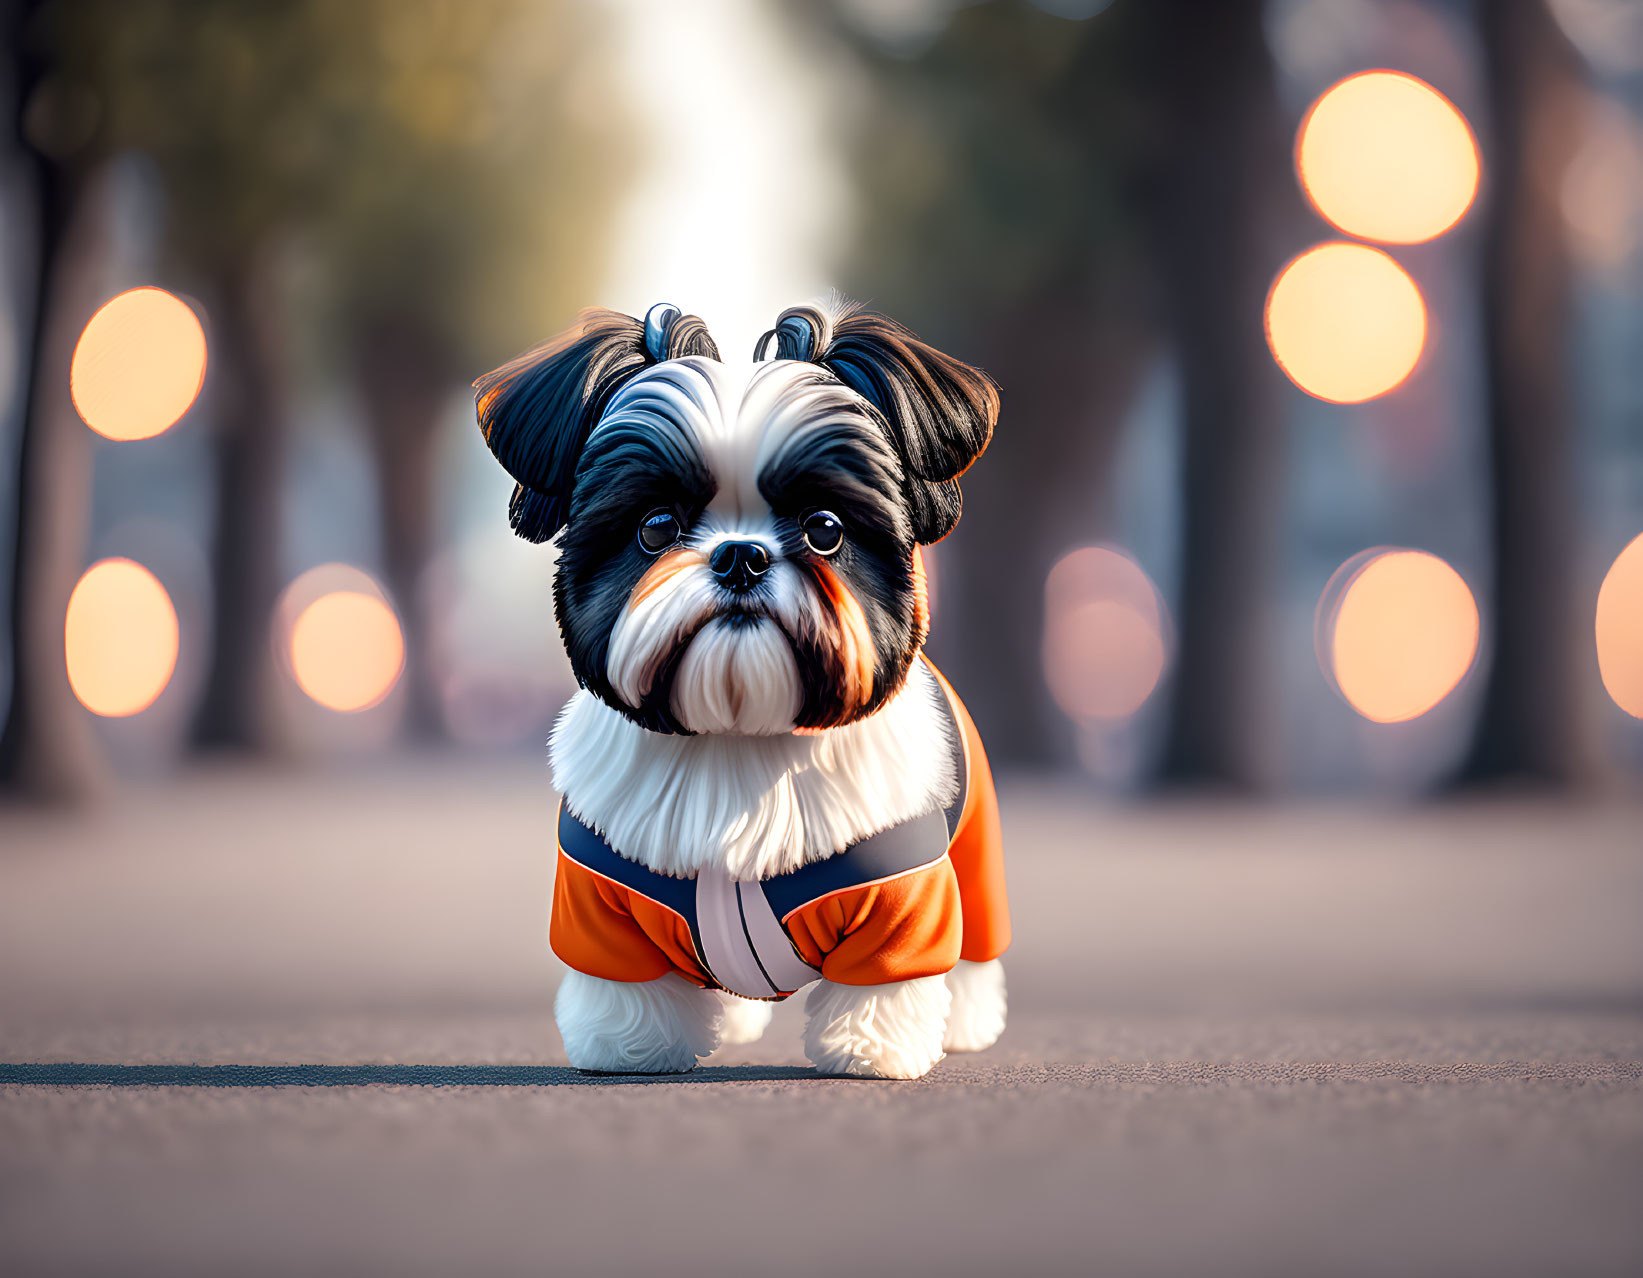 Black and white small dog in orange jacket on pathway with blurred lights